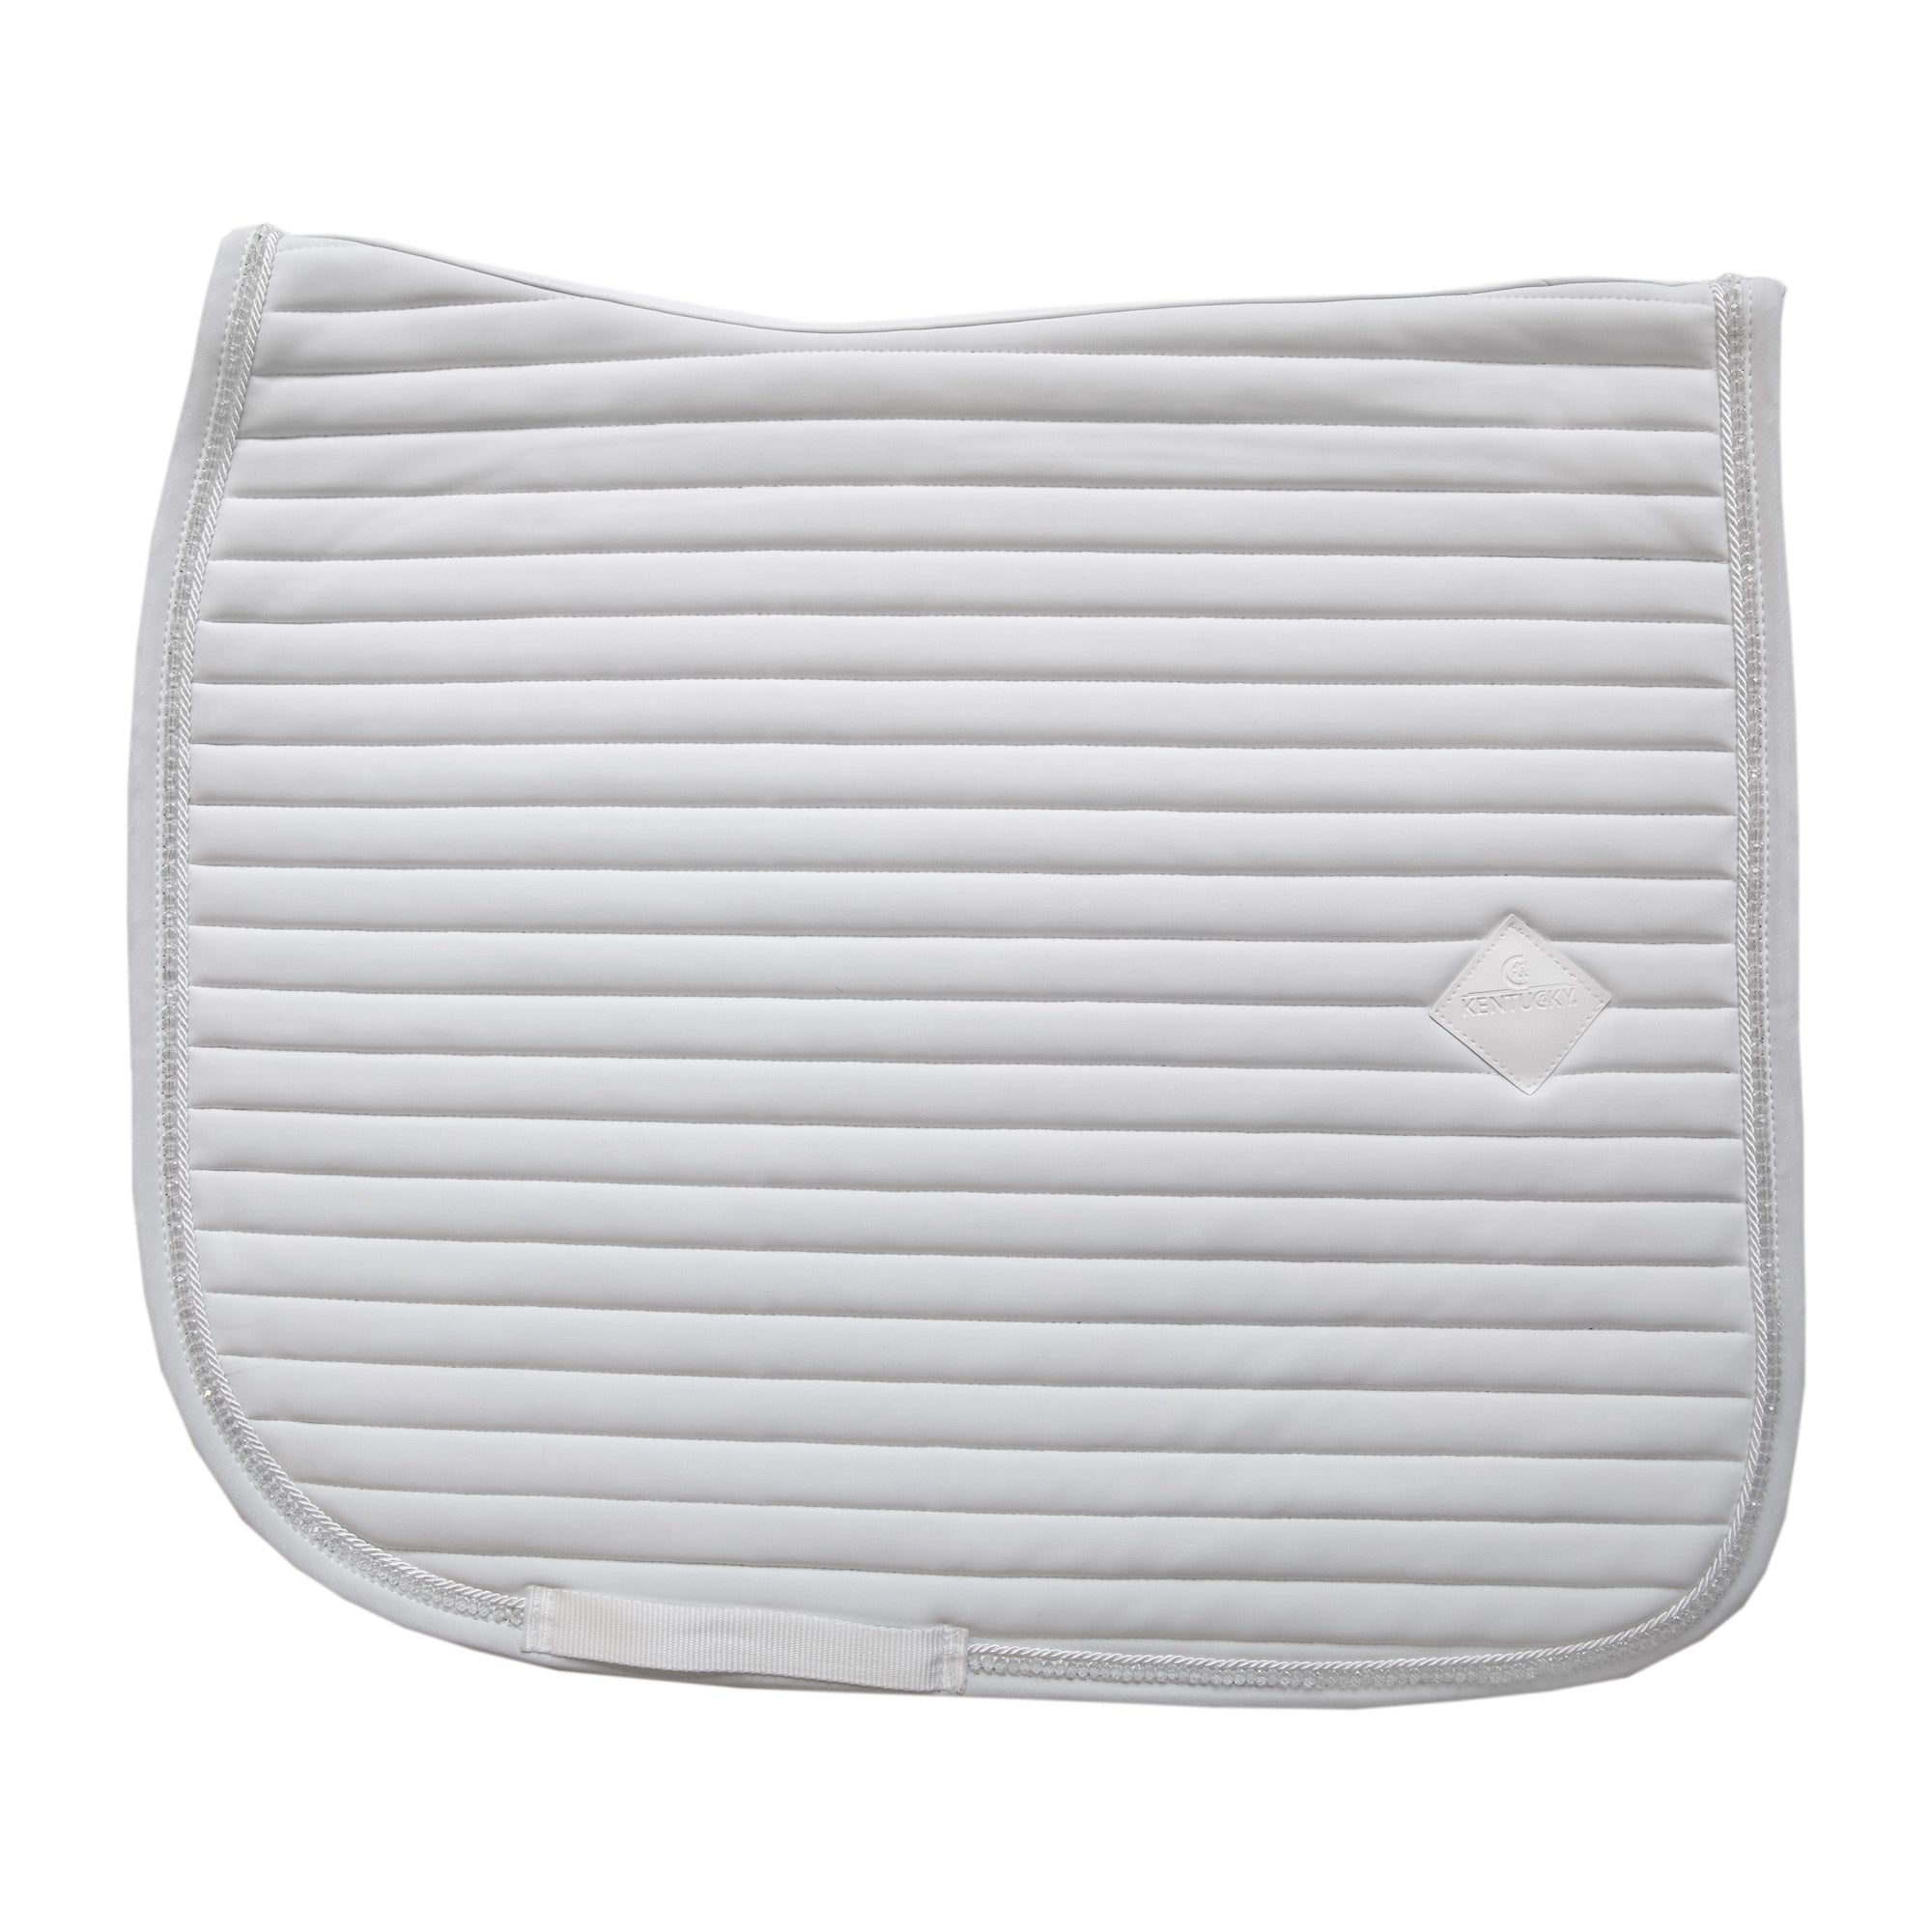 Kentucky Horsewear Saddle Pad Pearls Dressage White Edition Full